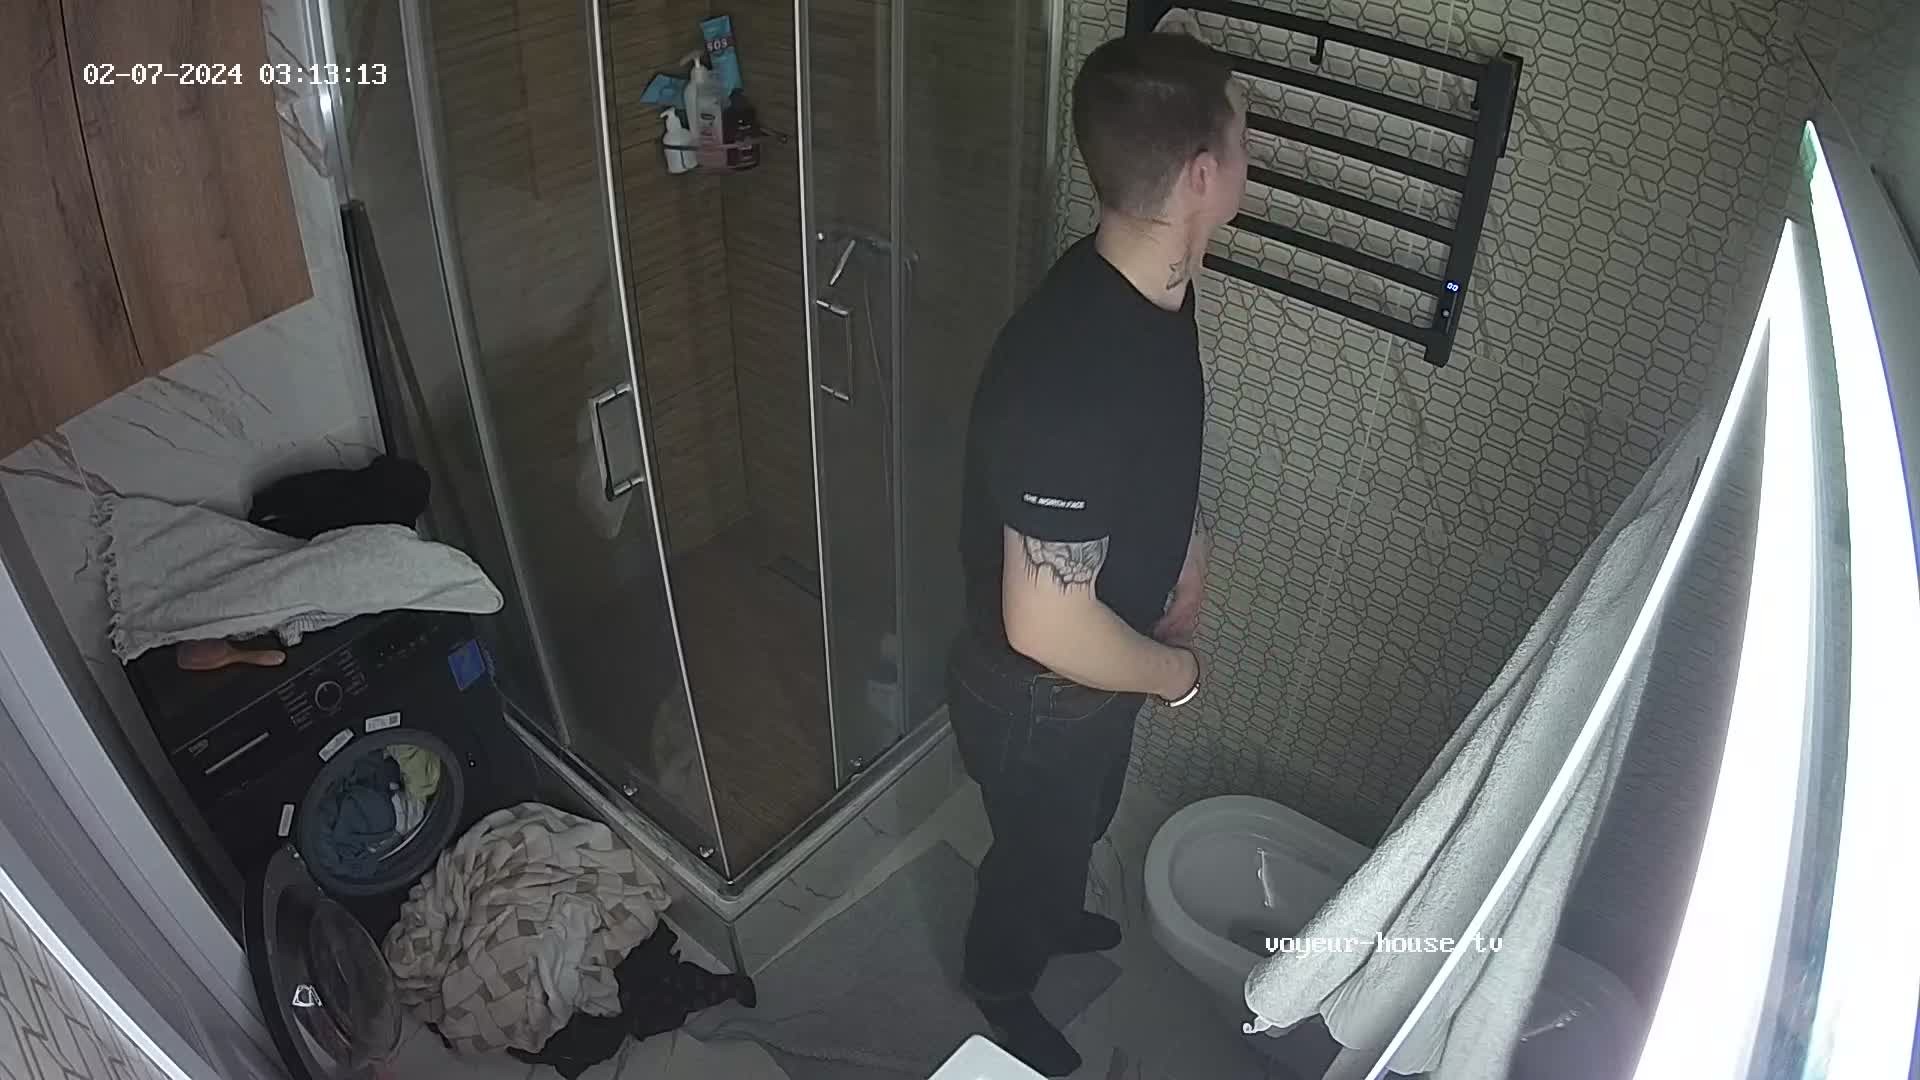 Guest guy pissing with erection 07-02-2024